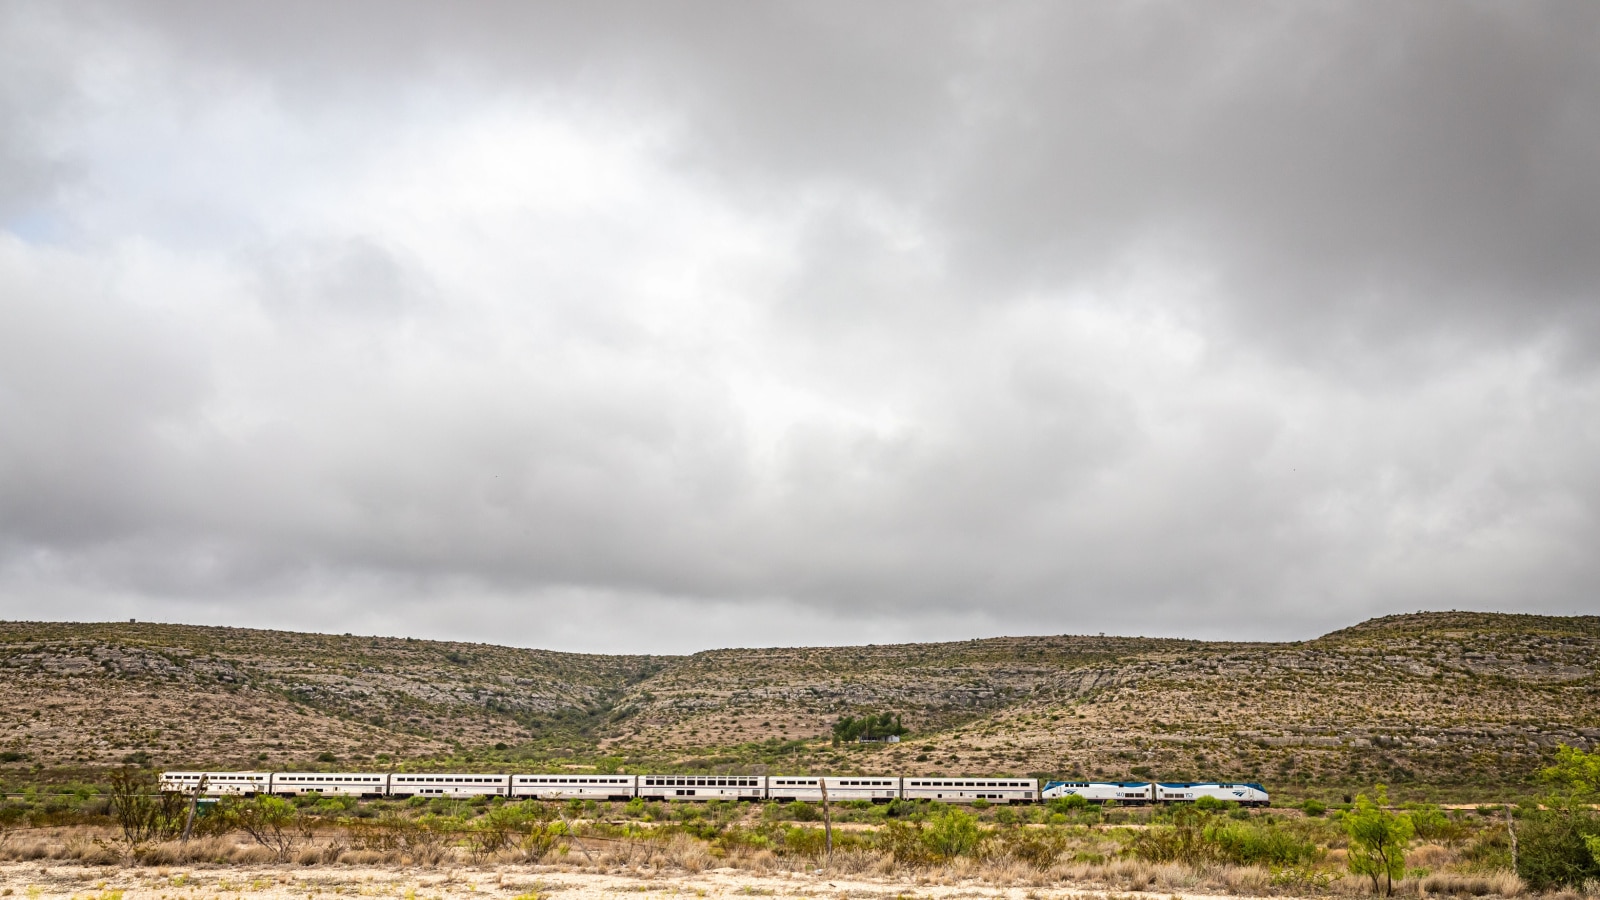 Terrell County, Texas / United States - June 2, 2020: The Amtrak Sunset Limited train travels through the desert near Sanderson, Texas.